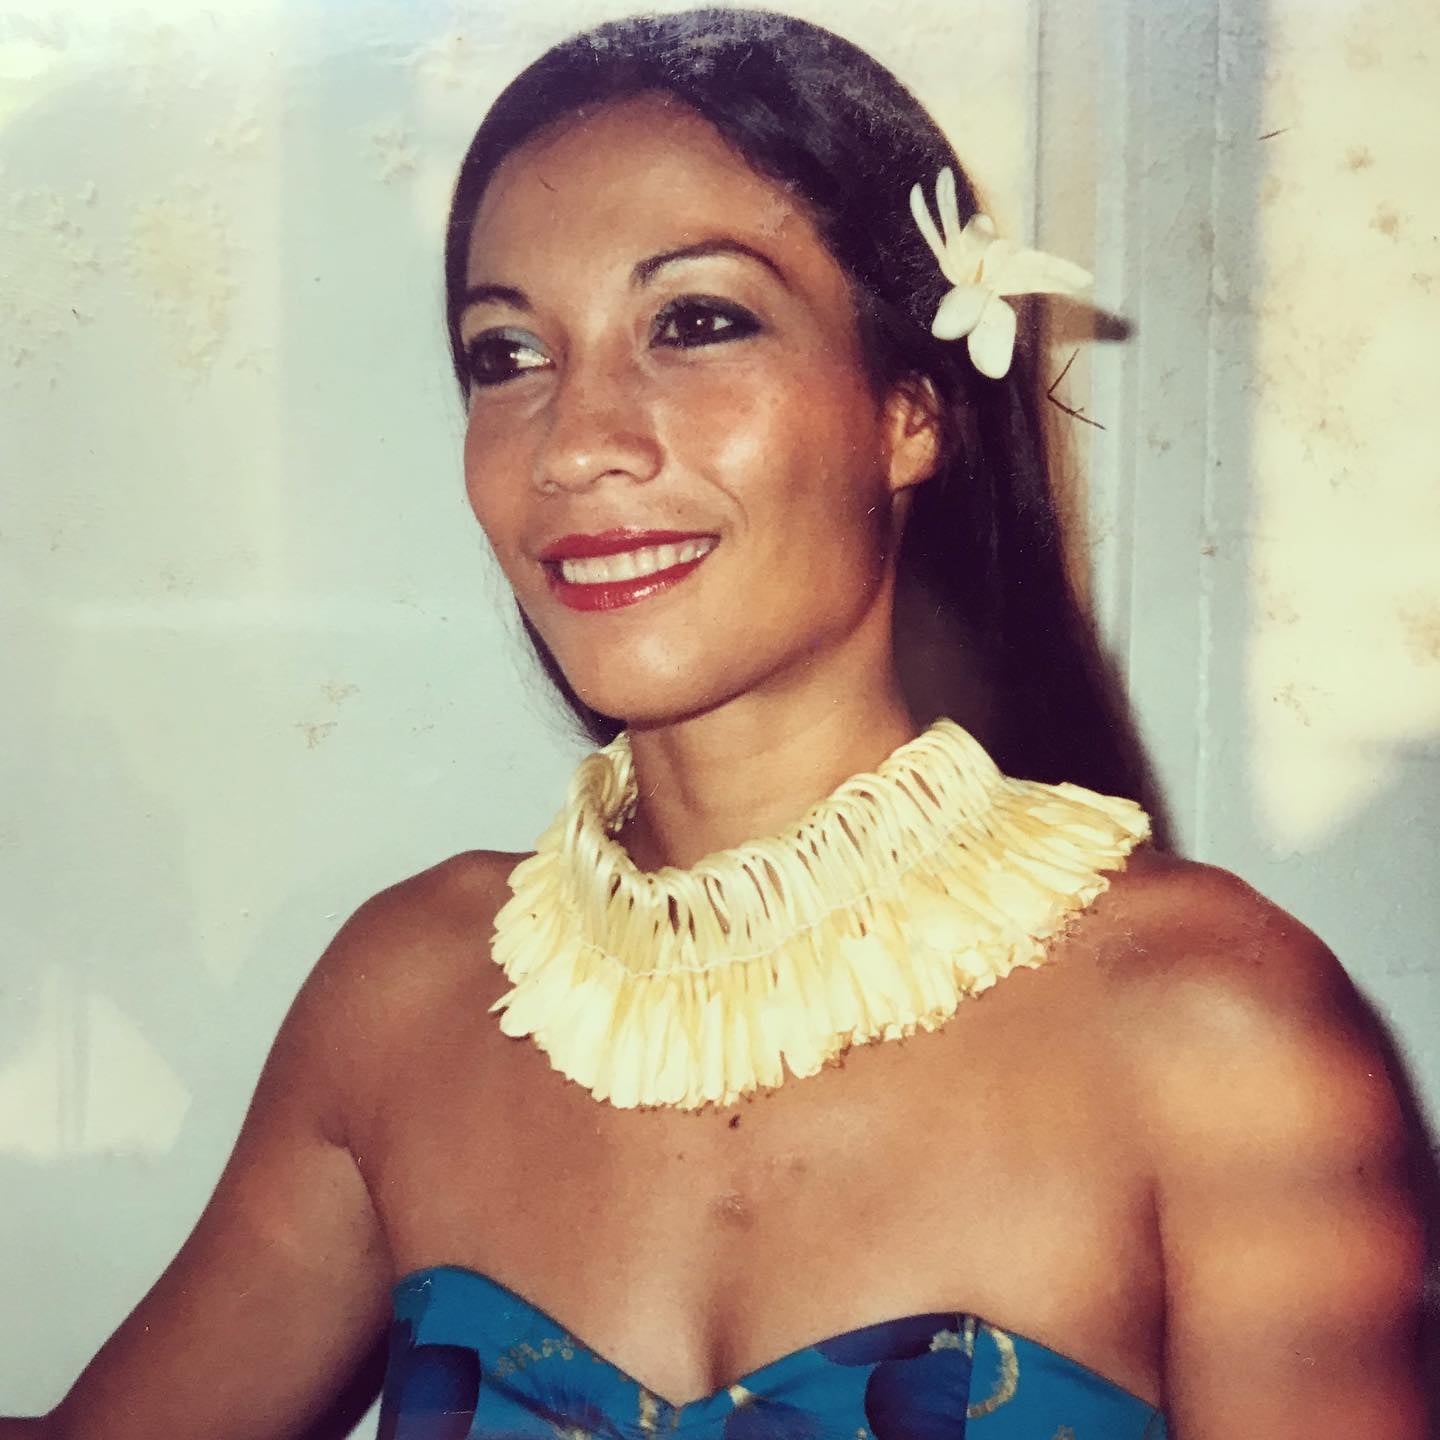 My mother at my age right now (25) getting ready to dance.